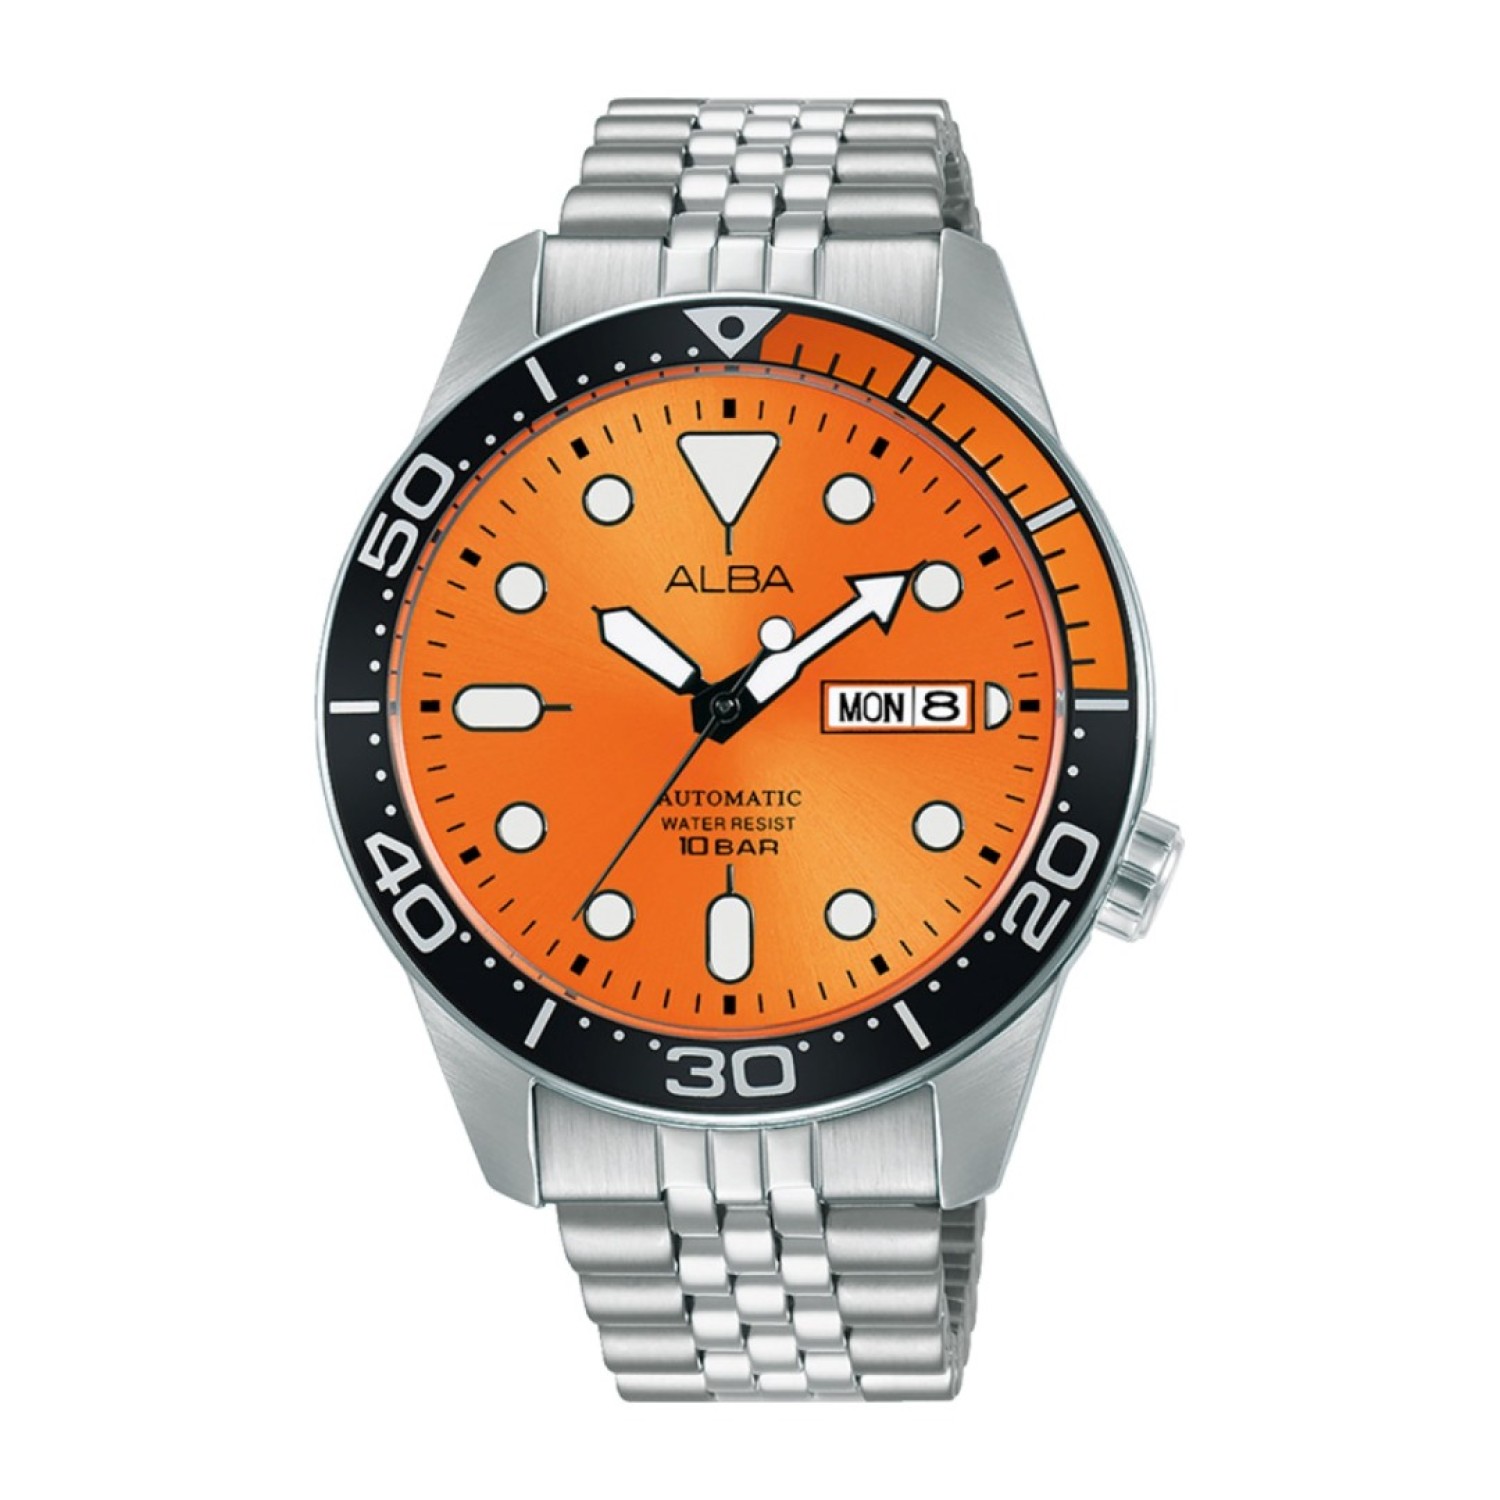 AL4189X1-ALBA MENS ORANGE  DIAL AUTOMATIC WATCH. unique engagement rings nz  Alba AL4189X1  is an elegant and stylish mens analog watch that combines classic design with modern technology.